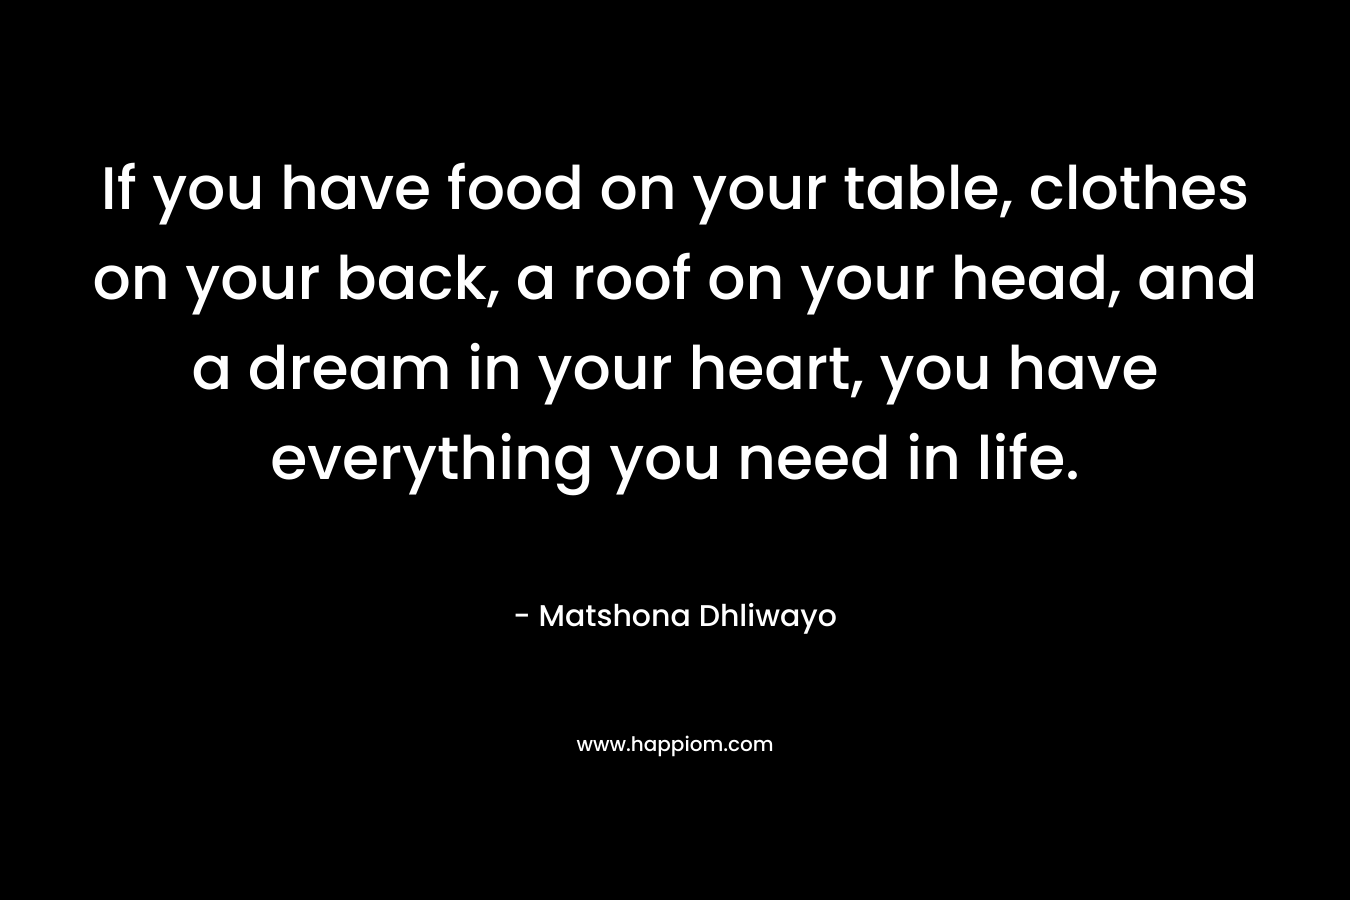 If you have food on your table, clothes on your back, a roof on your head, and a dream in your heart, you have everything you need in life.